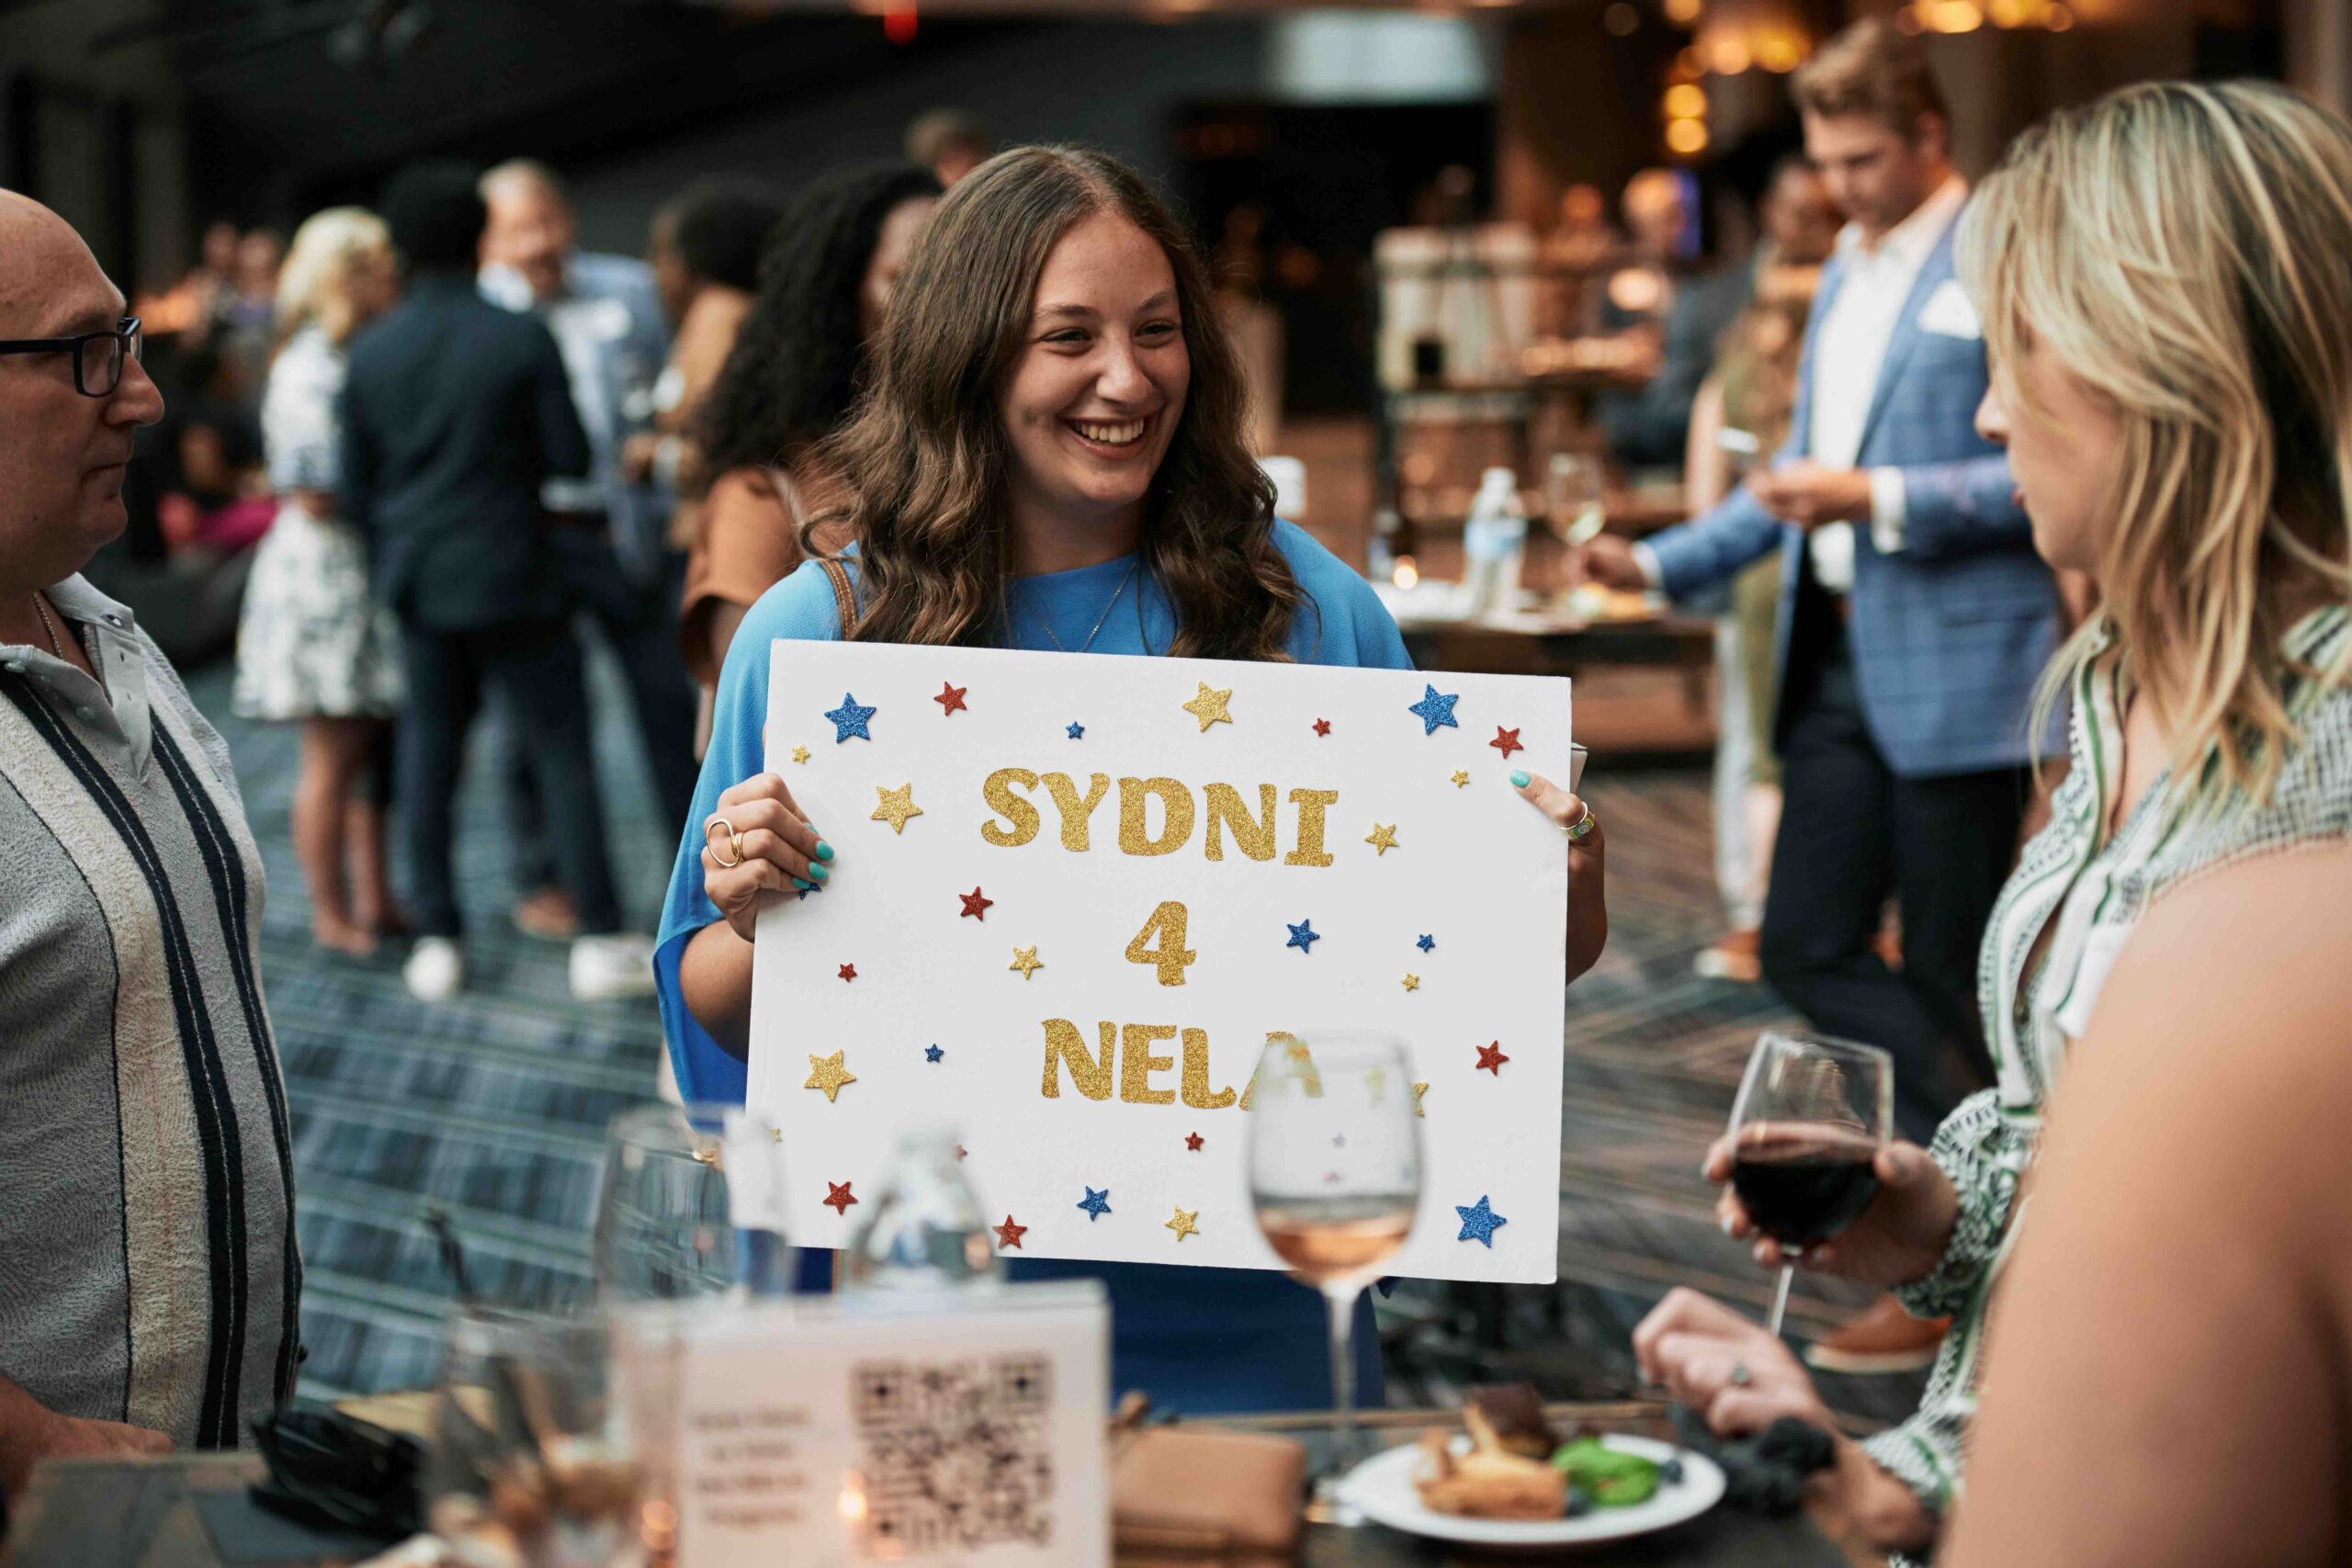 A joyful gathering with a smiling woman holding a custom sign that reads "sydni 4 nela," surrounded by guests enjoying drinks and conversation at a social event.